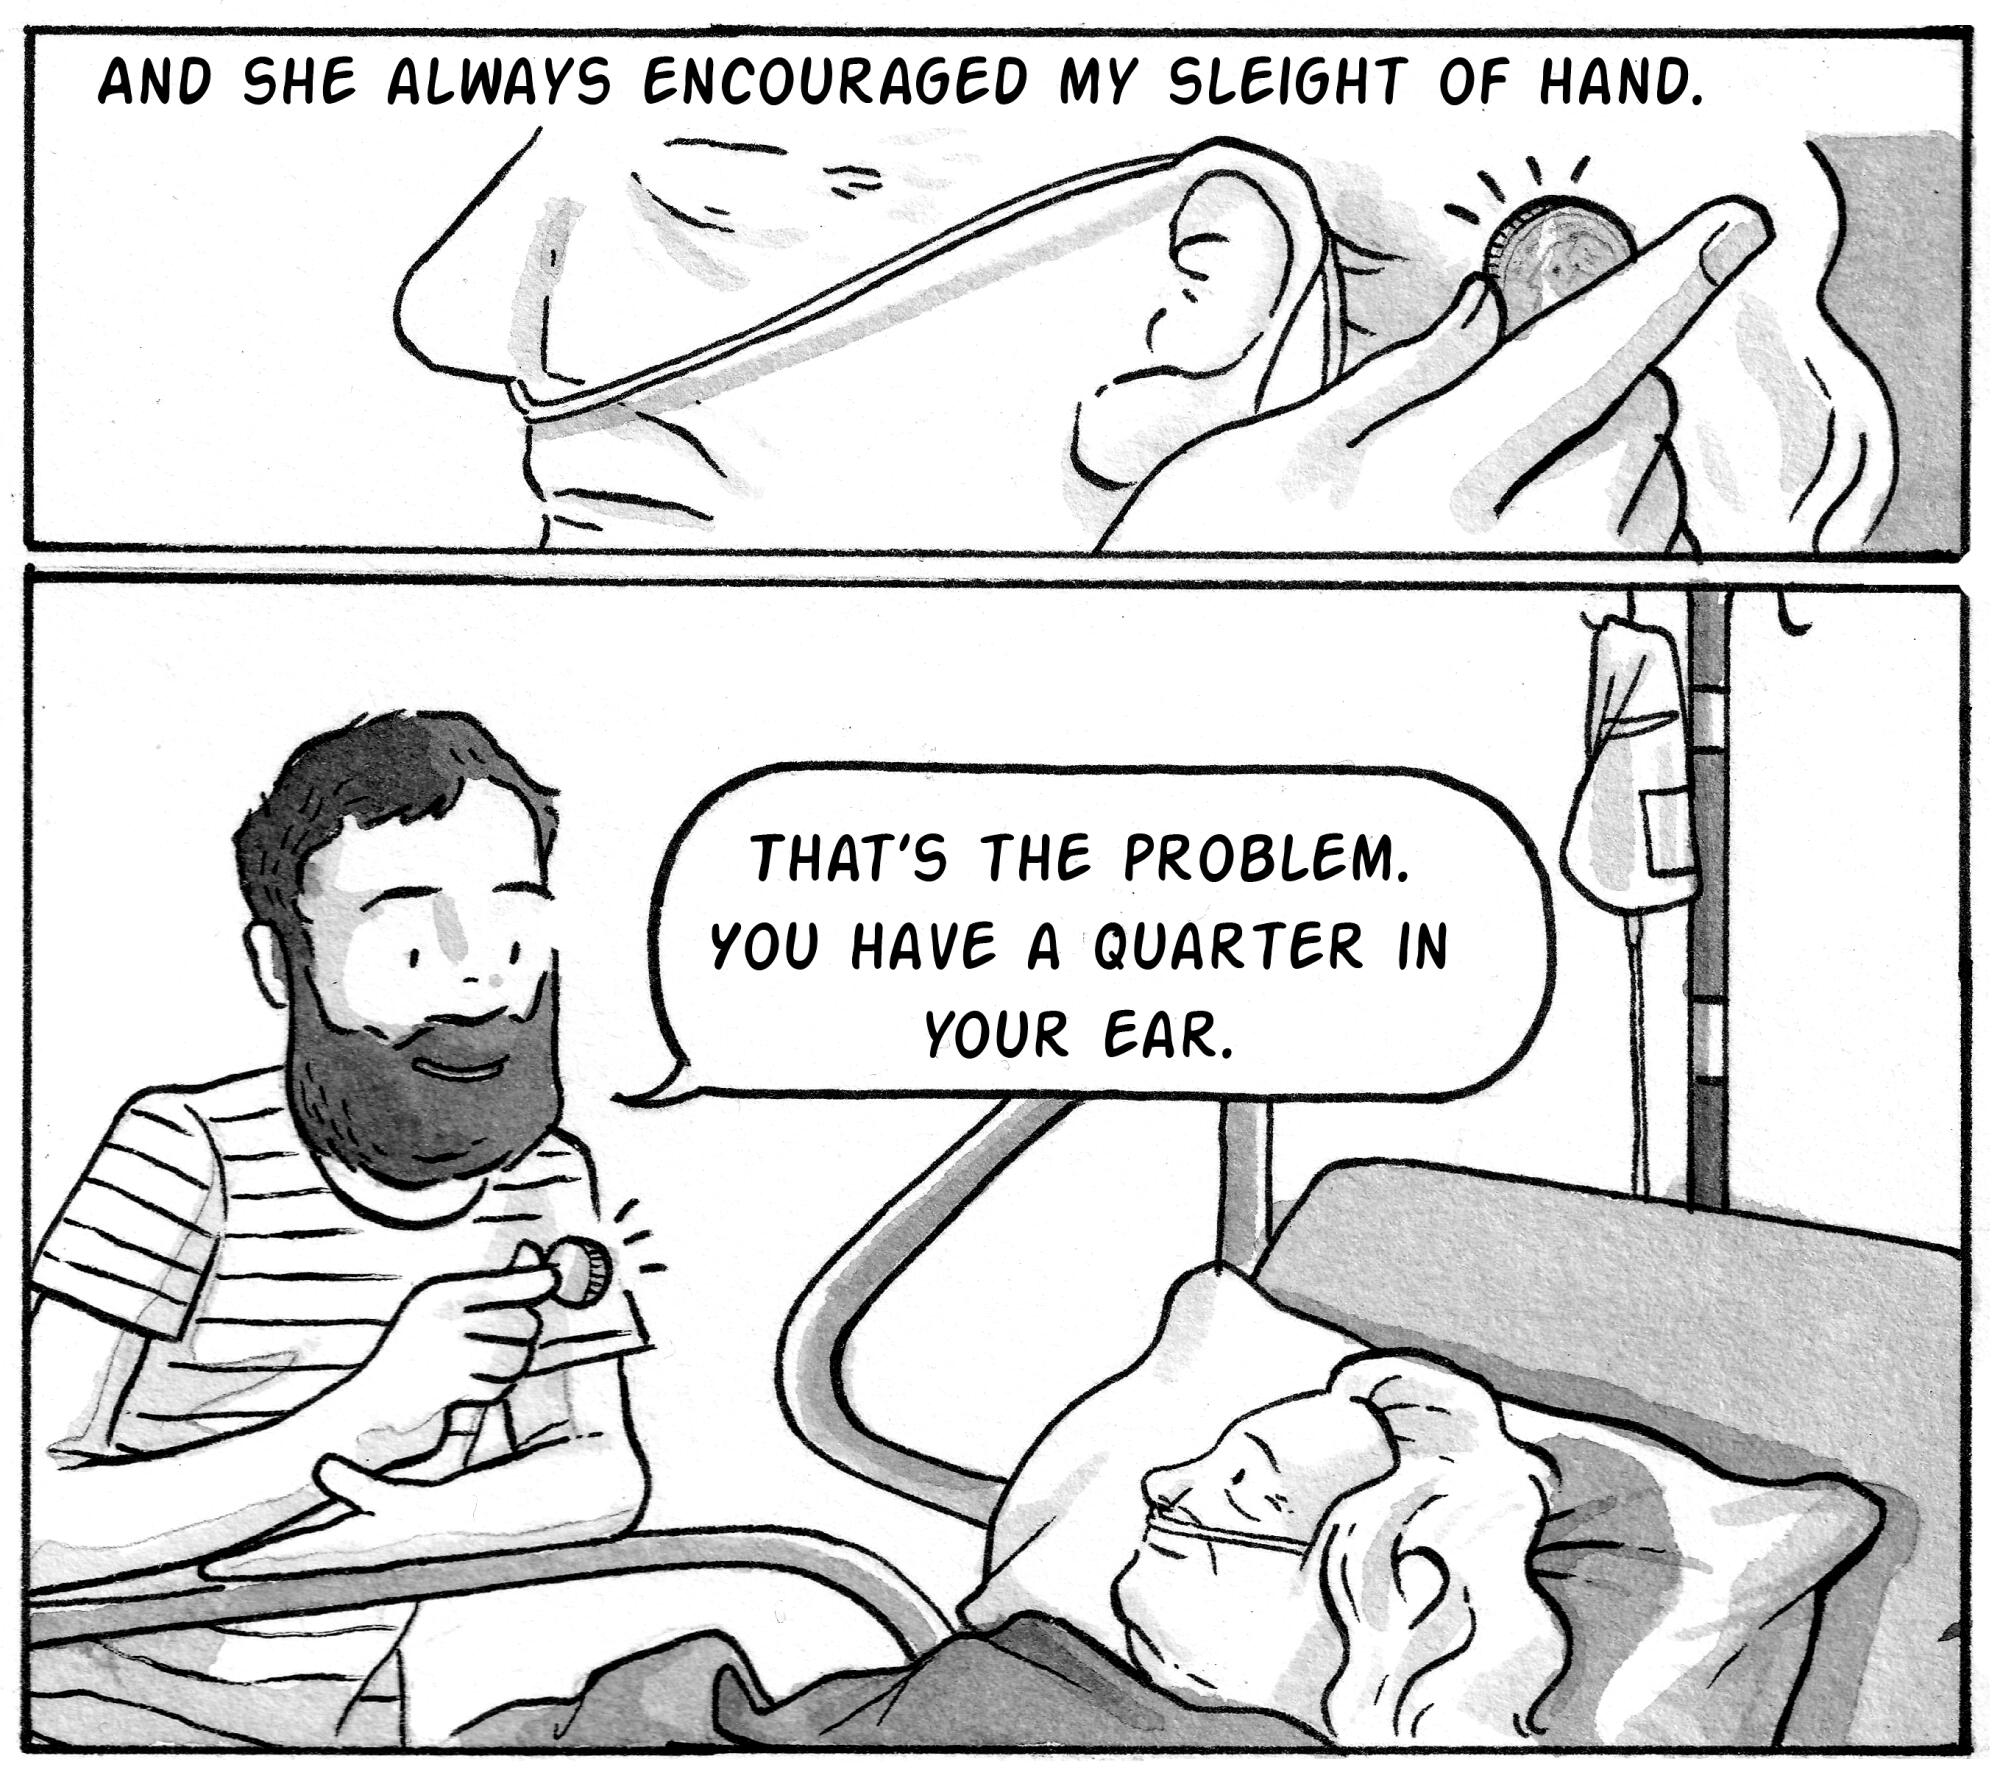 And she always encouraged my sleight of hand. [Image: A man pulls a quarter from behind the ear of a woman in a hospital bed]